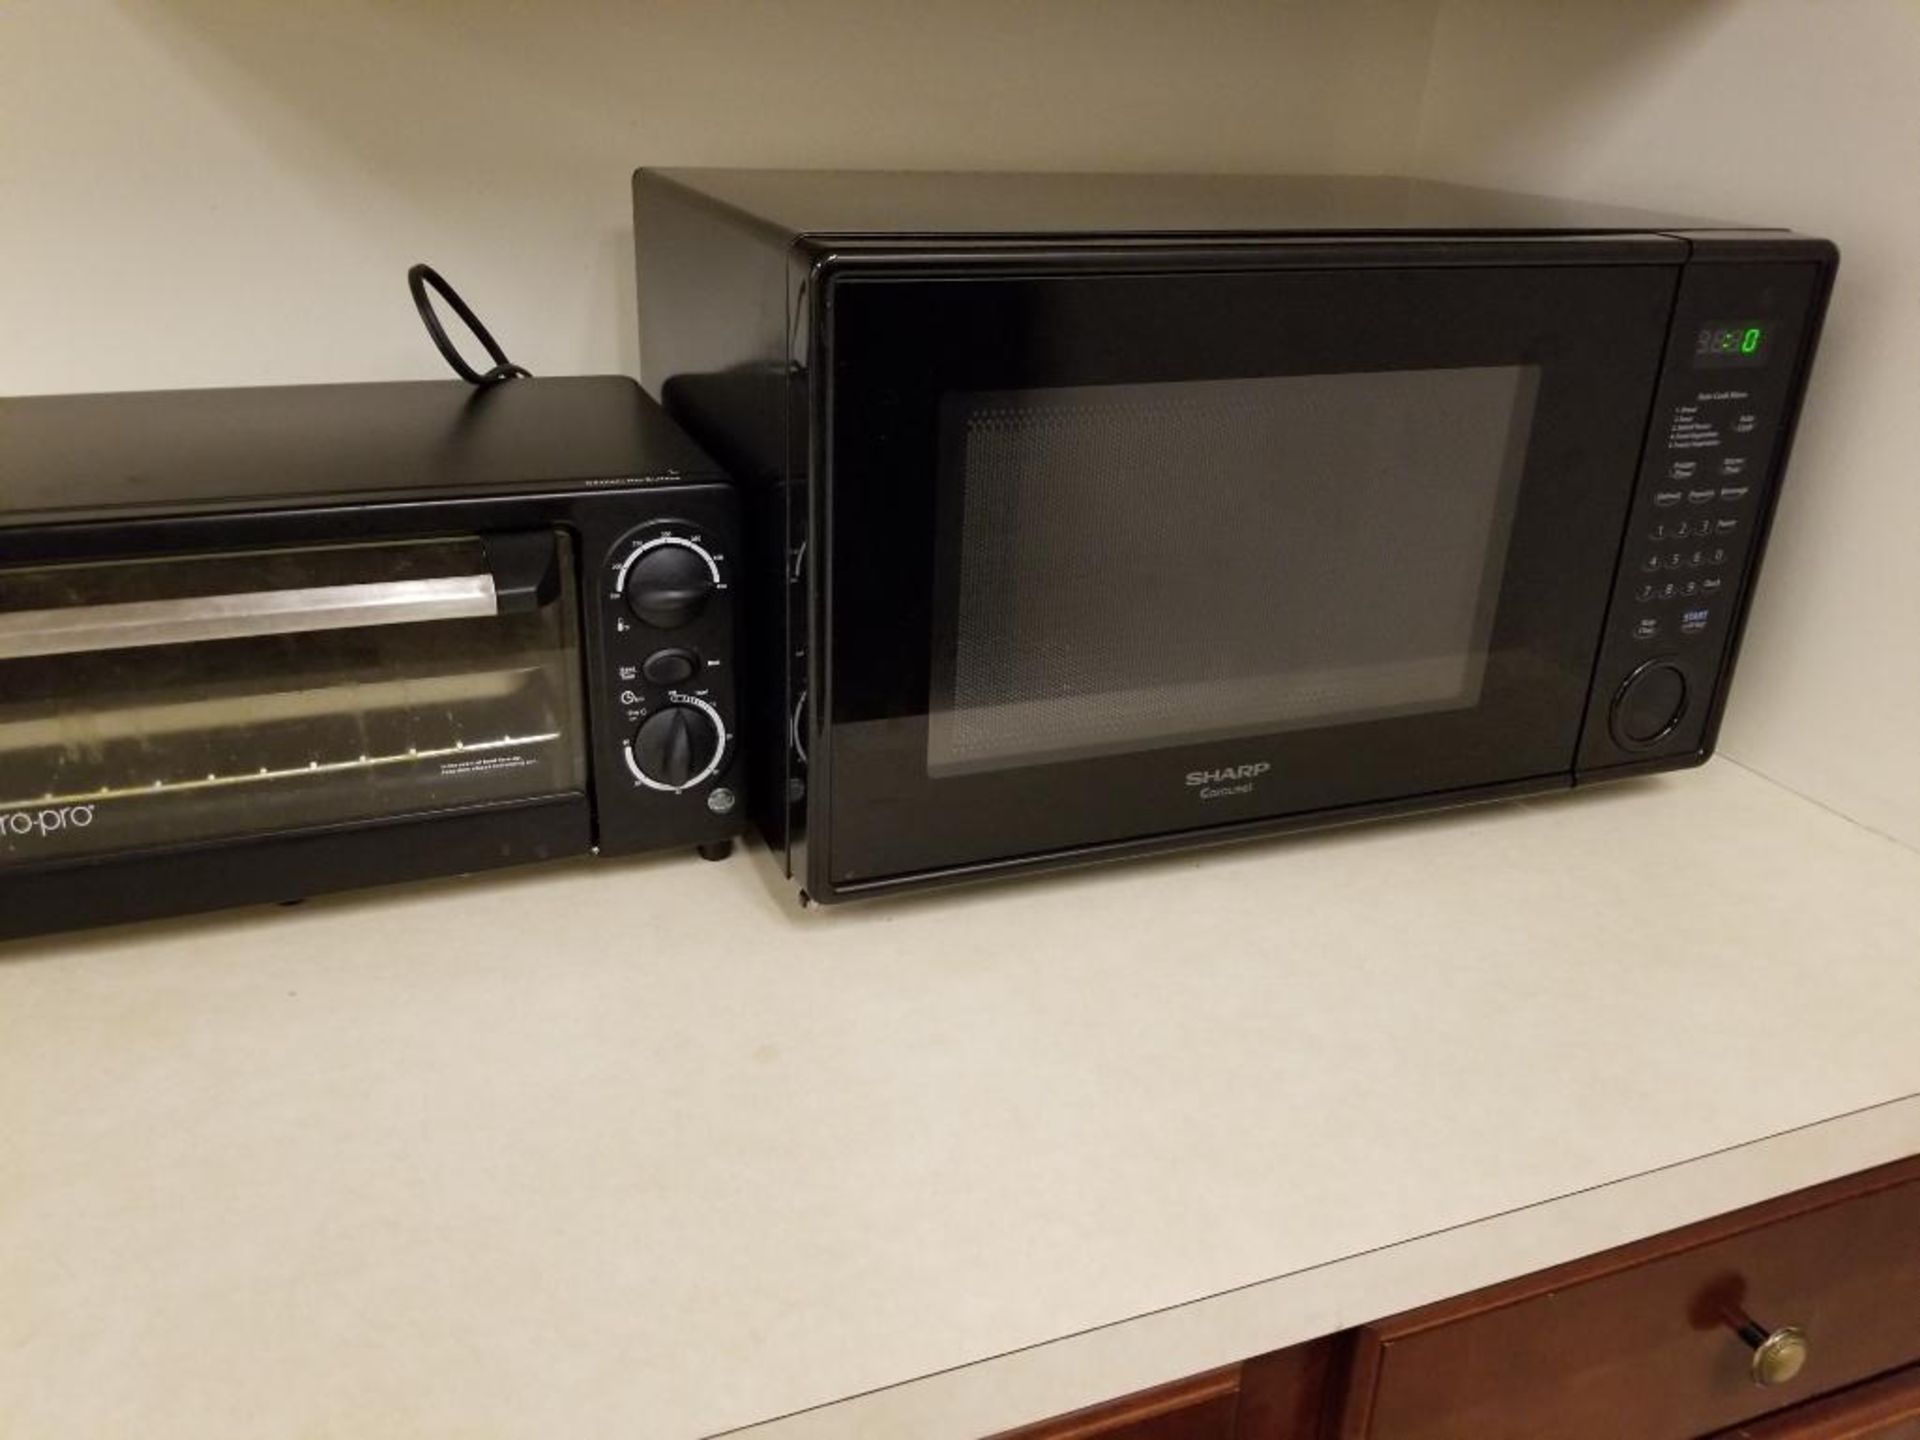 Contents of break room. (3) Tables, (4) Chairs, Microwave, small oven. - Image 2 of 7